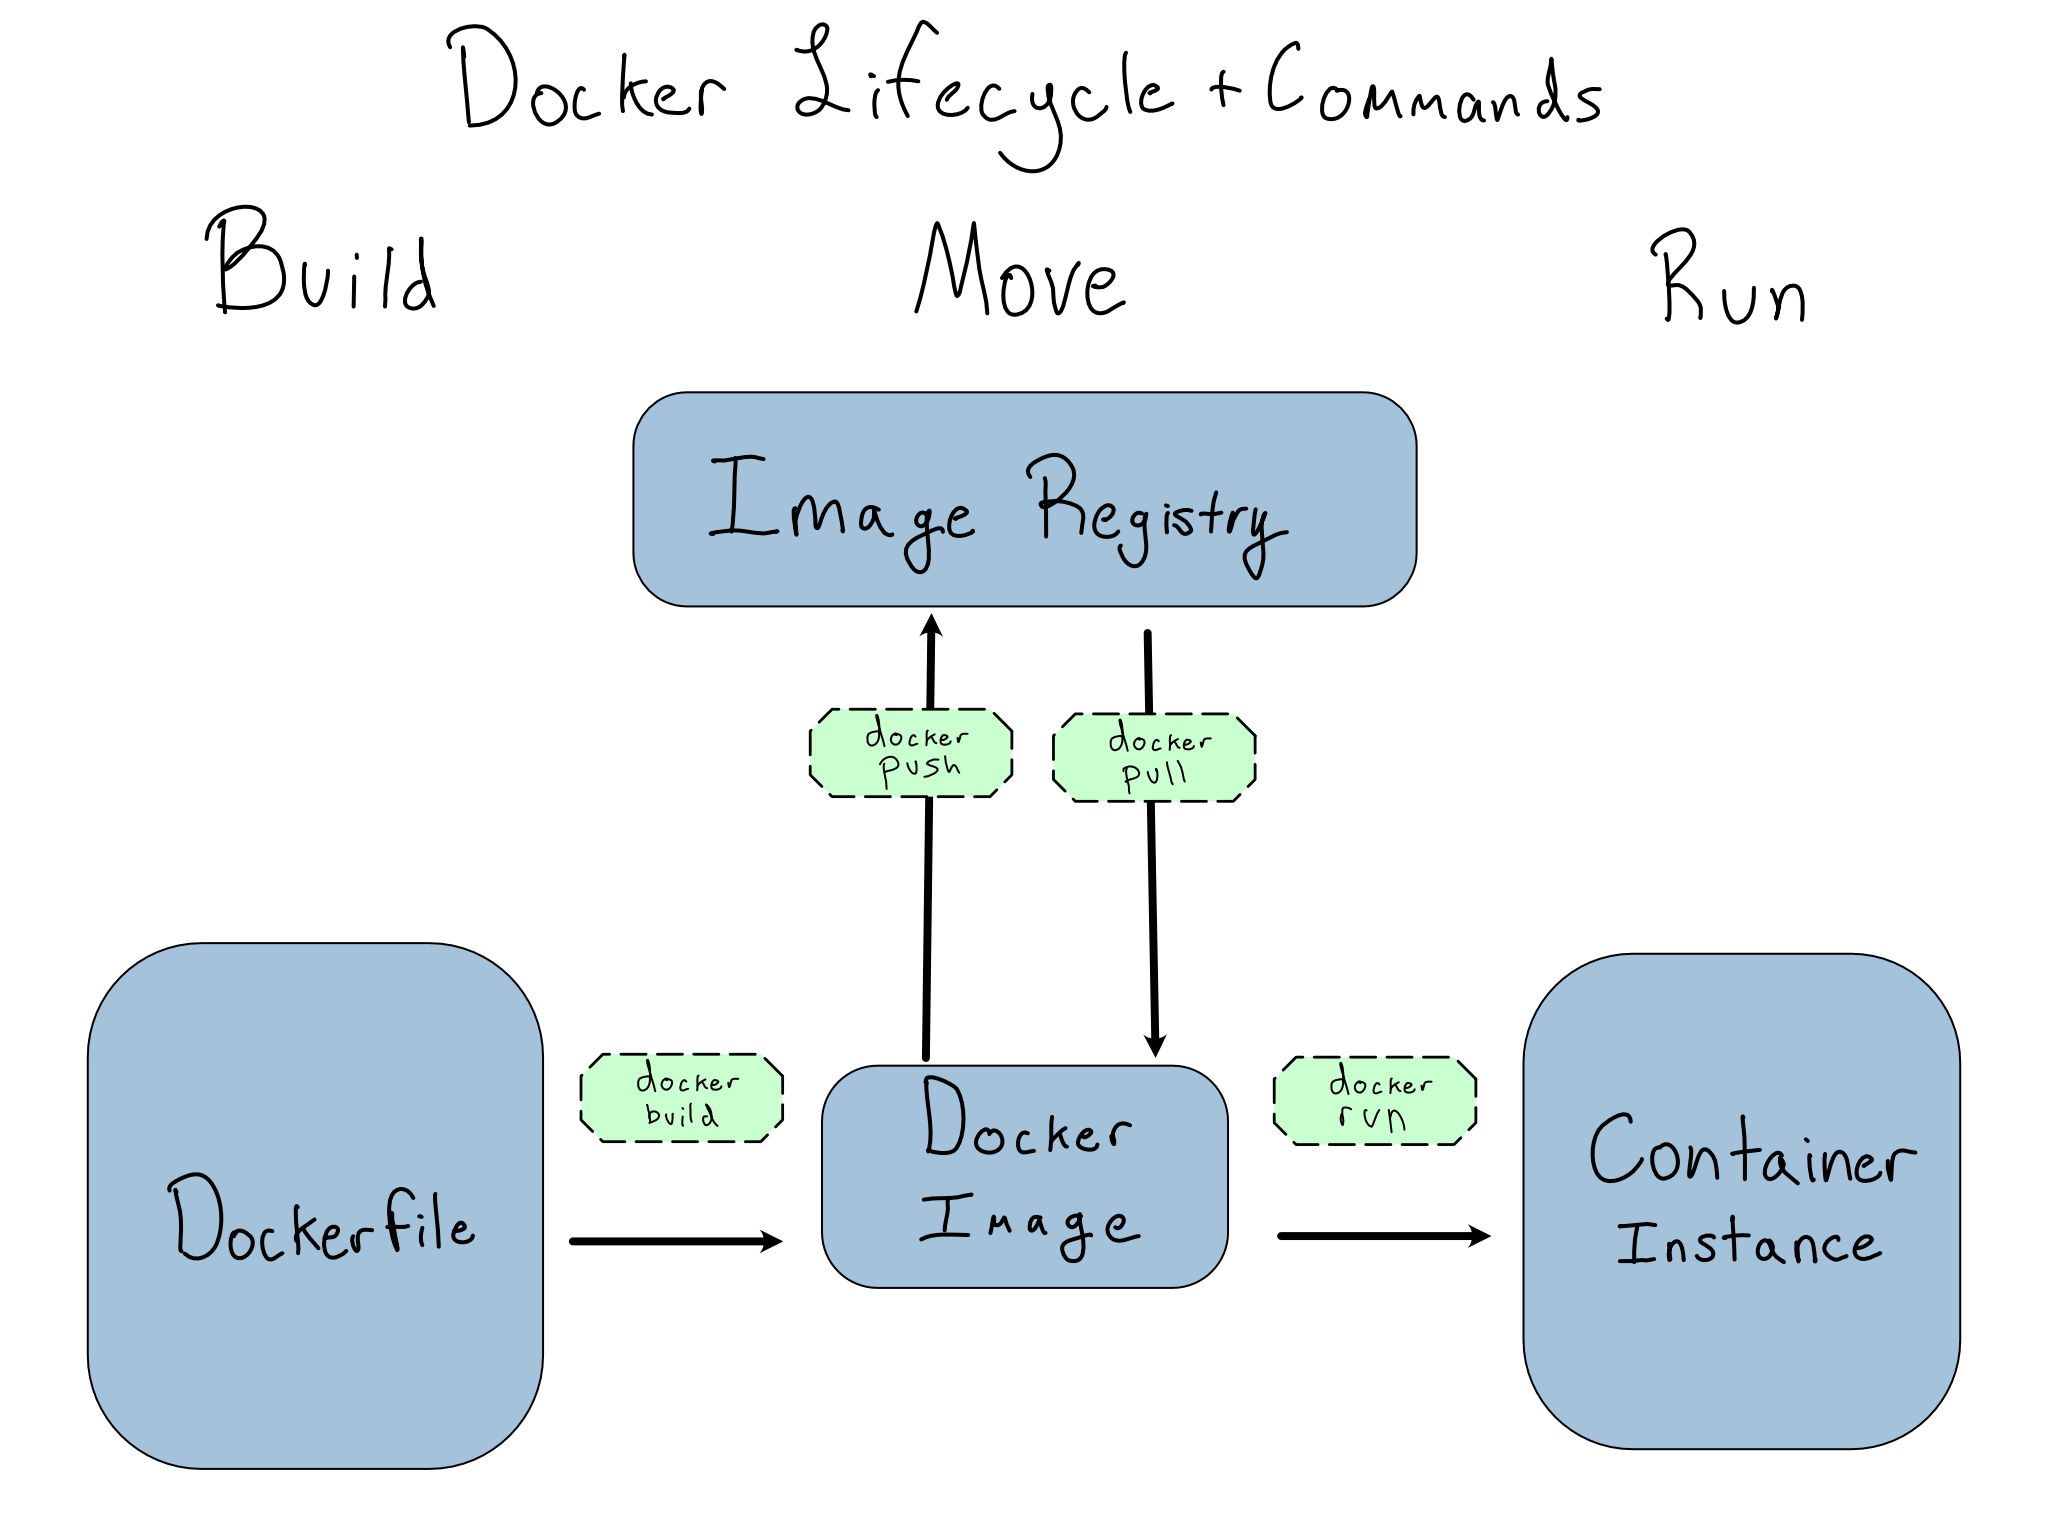 A diagram. A dockerfile turns into a \index{Docker}Docker Image with docker build. The image can push or pull to or from an image registry. The image can run as a \index{container}container instance.